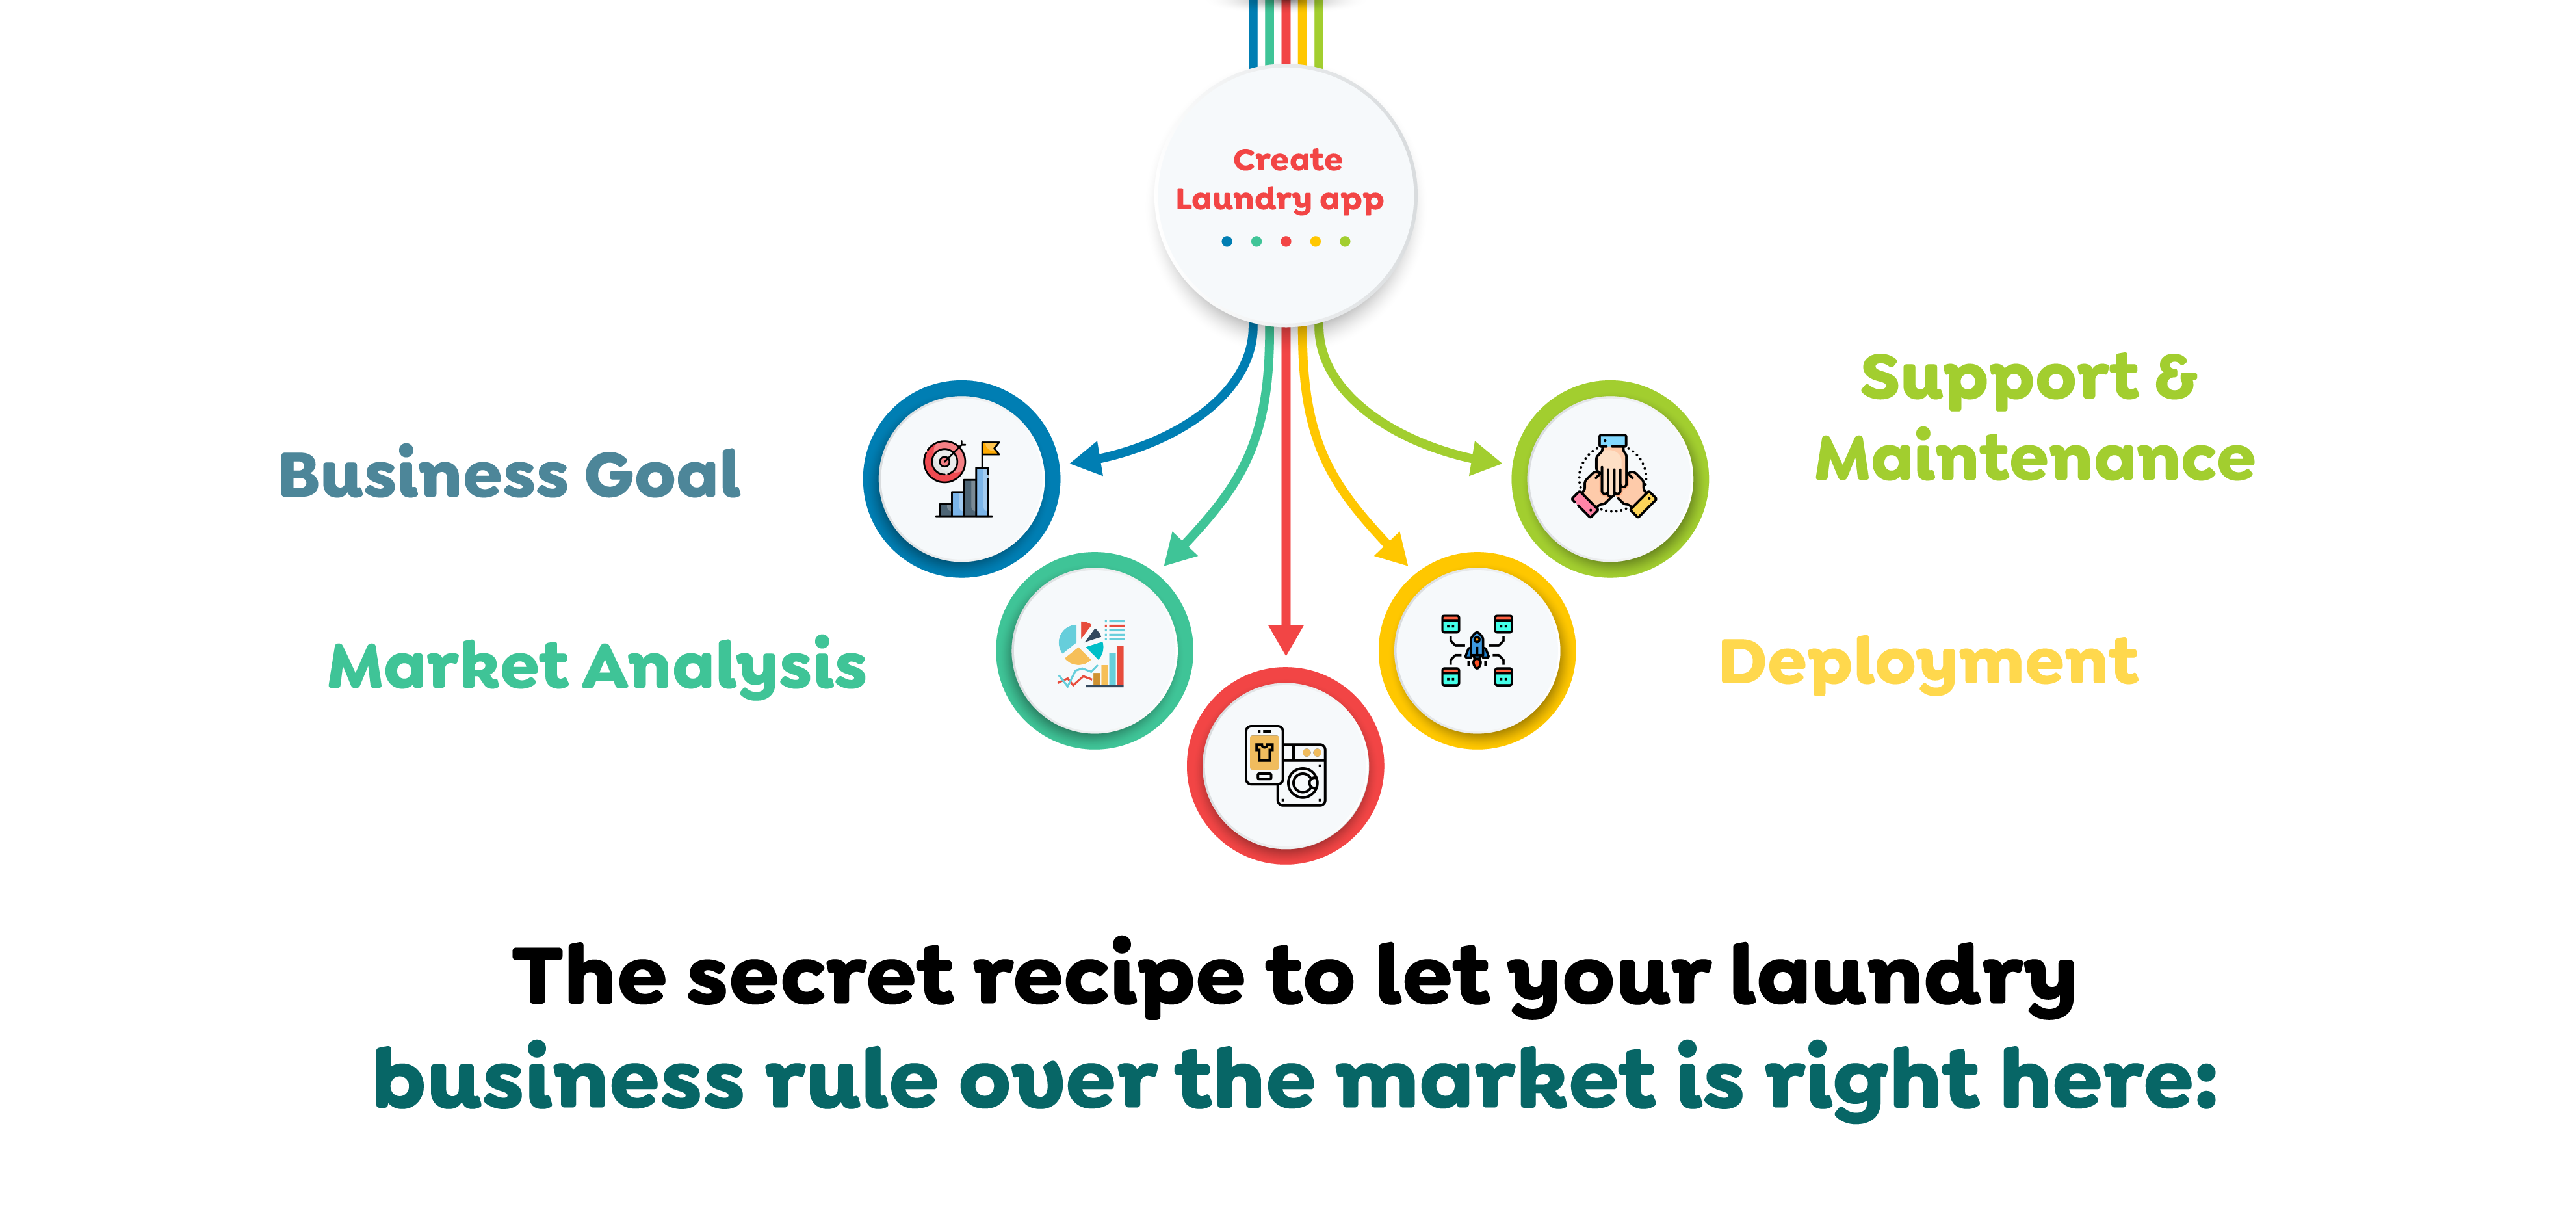 The secret recipe to let your laundry business rule over the market is right here